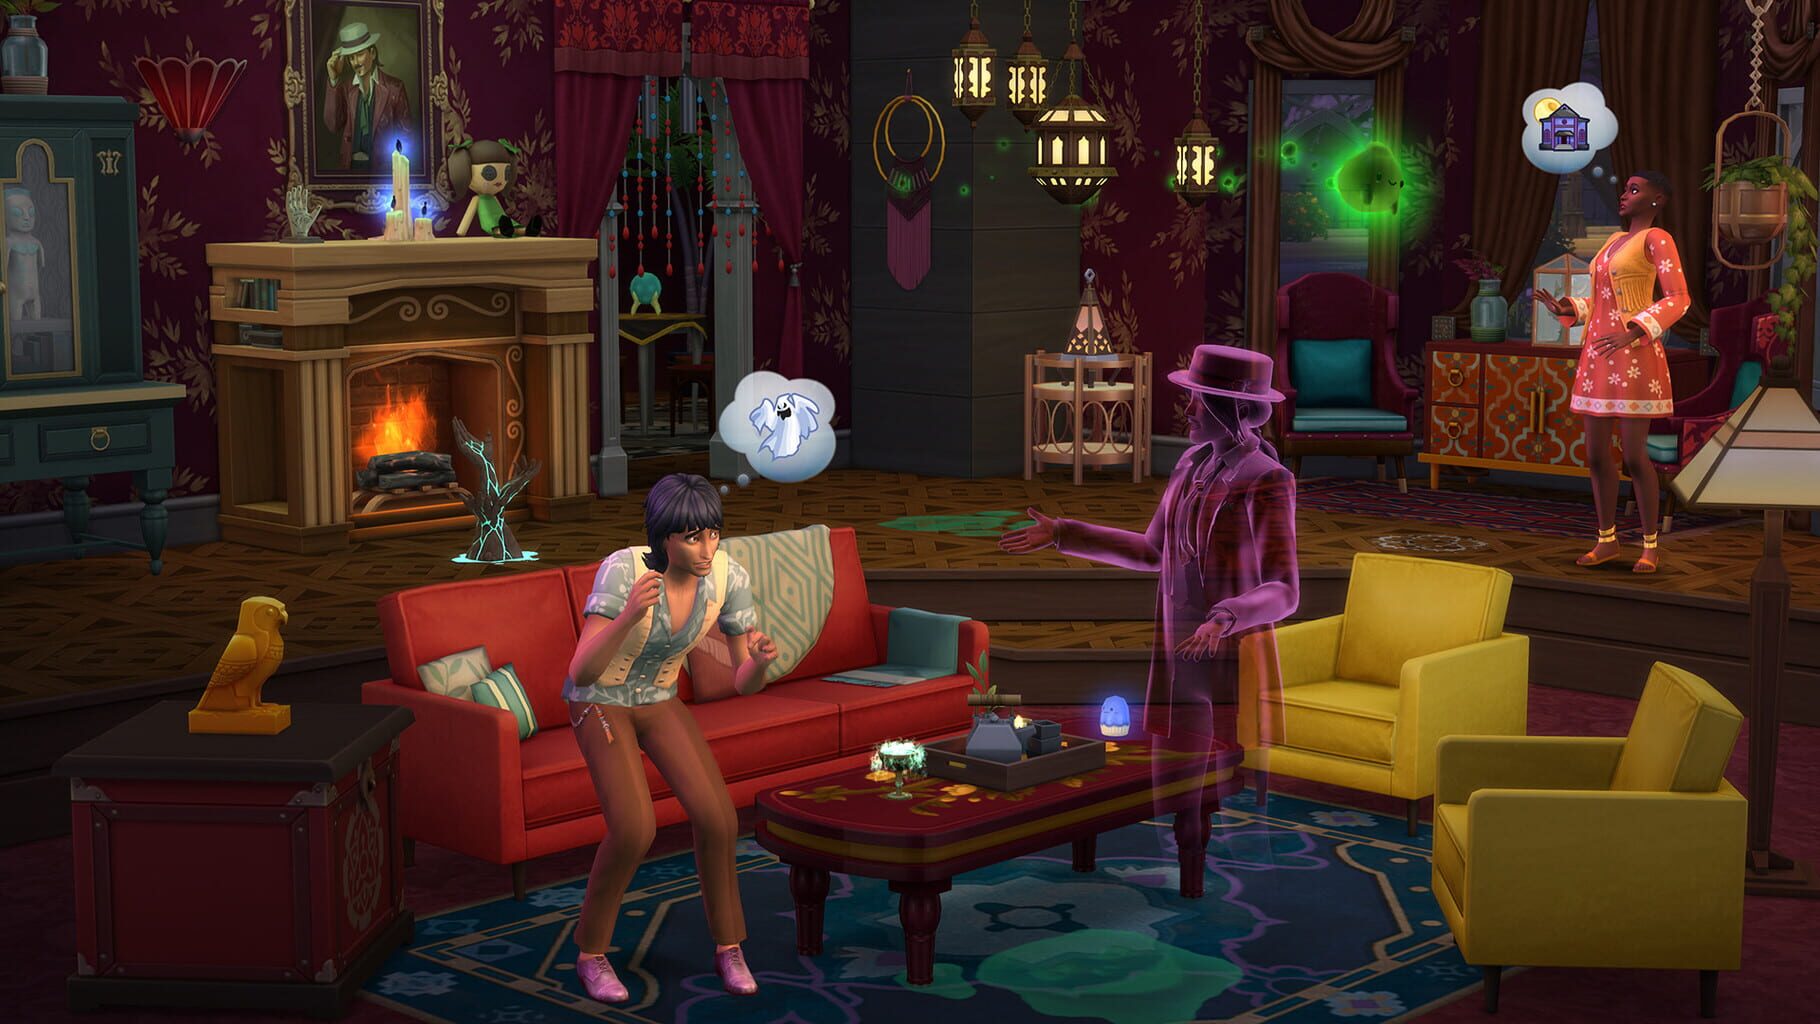 The Sims 4: Paranormal Stuff Image